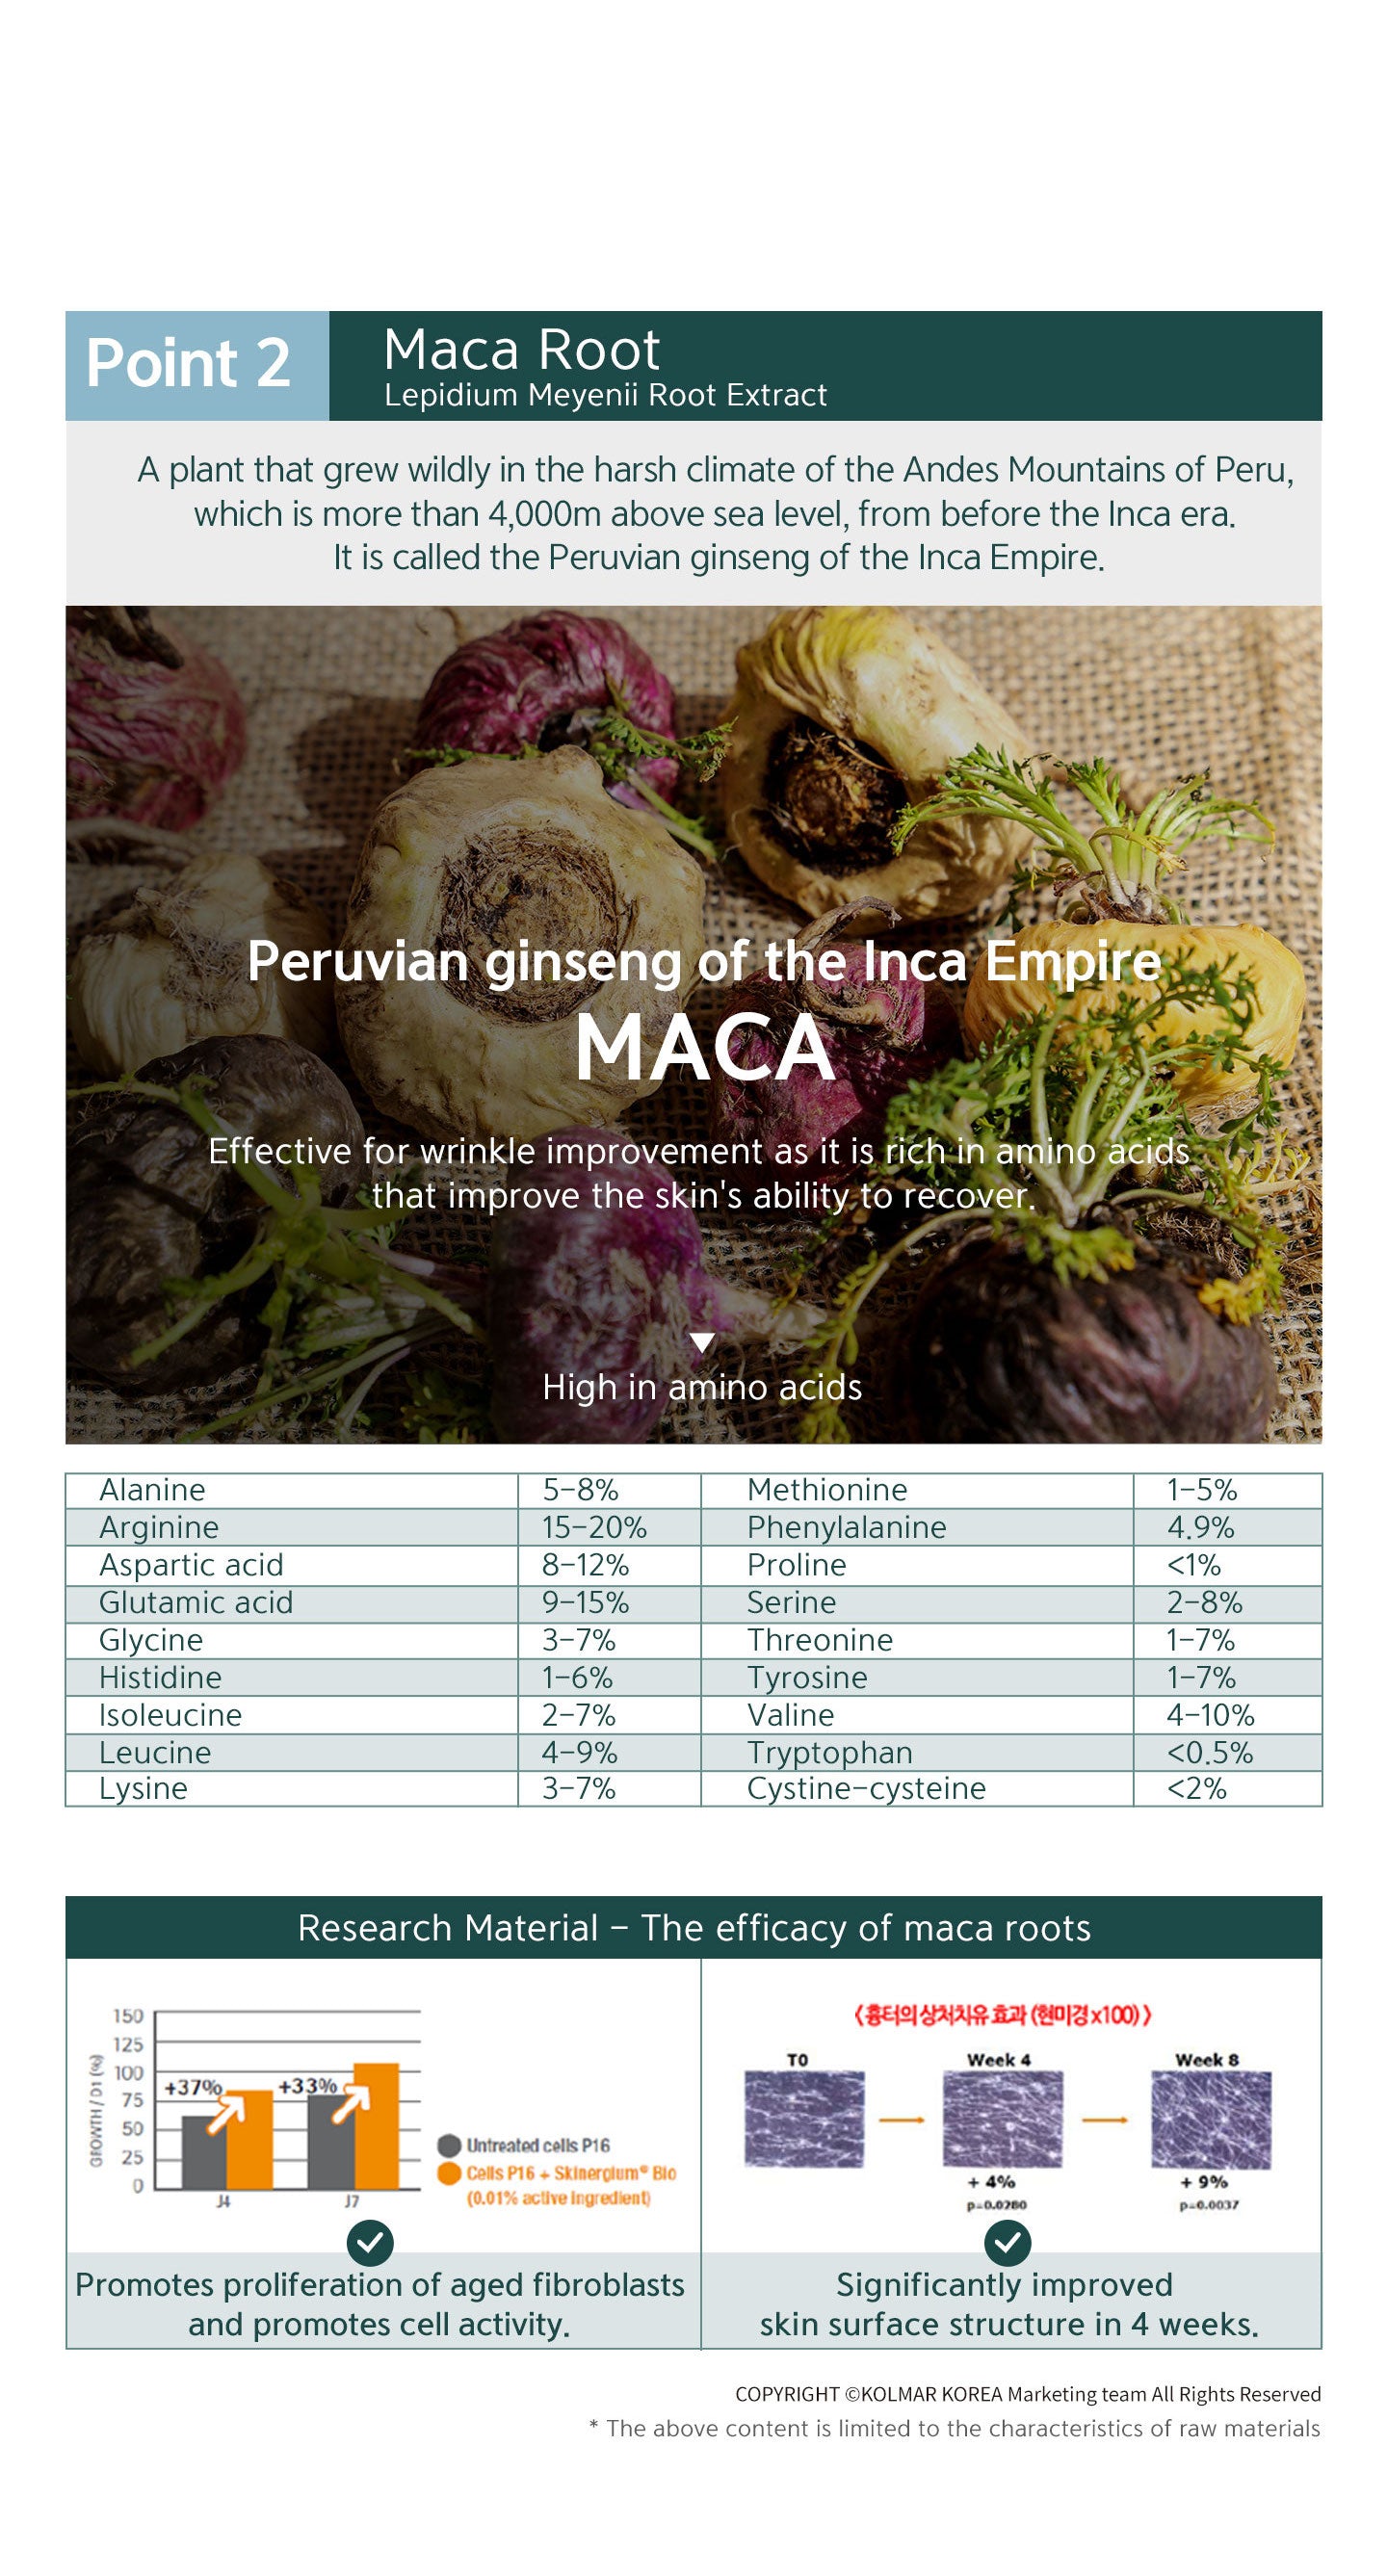 Maca root, a plant that grew wildly in the harsh climate of the Andes Mountains of Peru, which is more than 4000m above sea level, from before the Inca era. It is called the Peruvian ginseng of the Inca Empire. Effective for wrinkle improvement